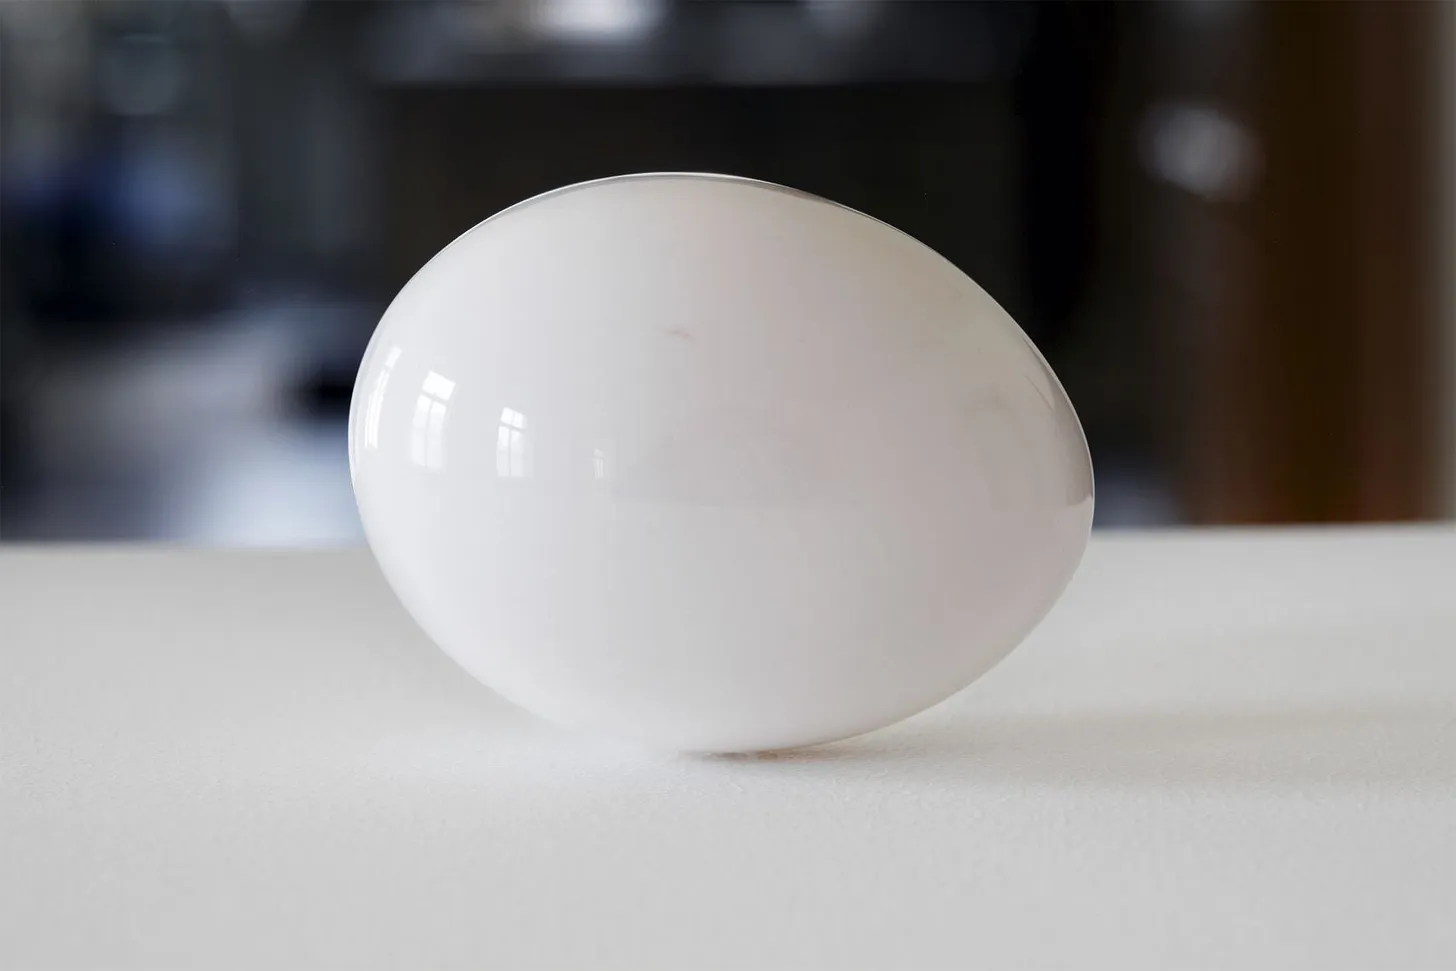 A white egg without a shell sits on a white table. The egg is so shiny you can see the windows of the surrounding room in its reflection